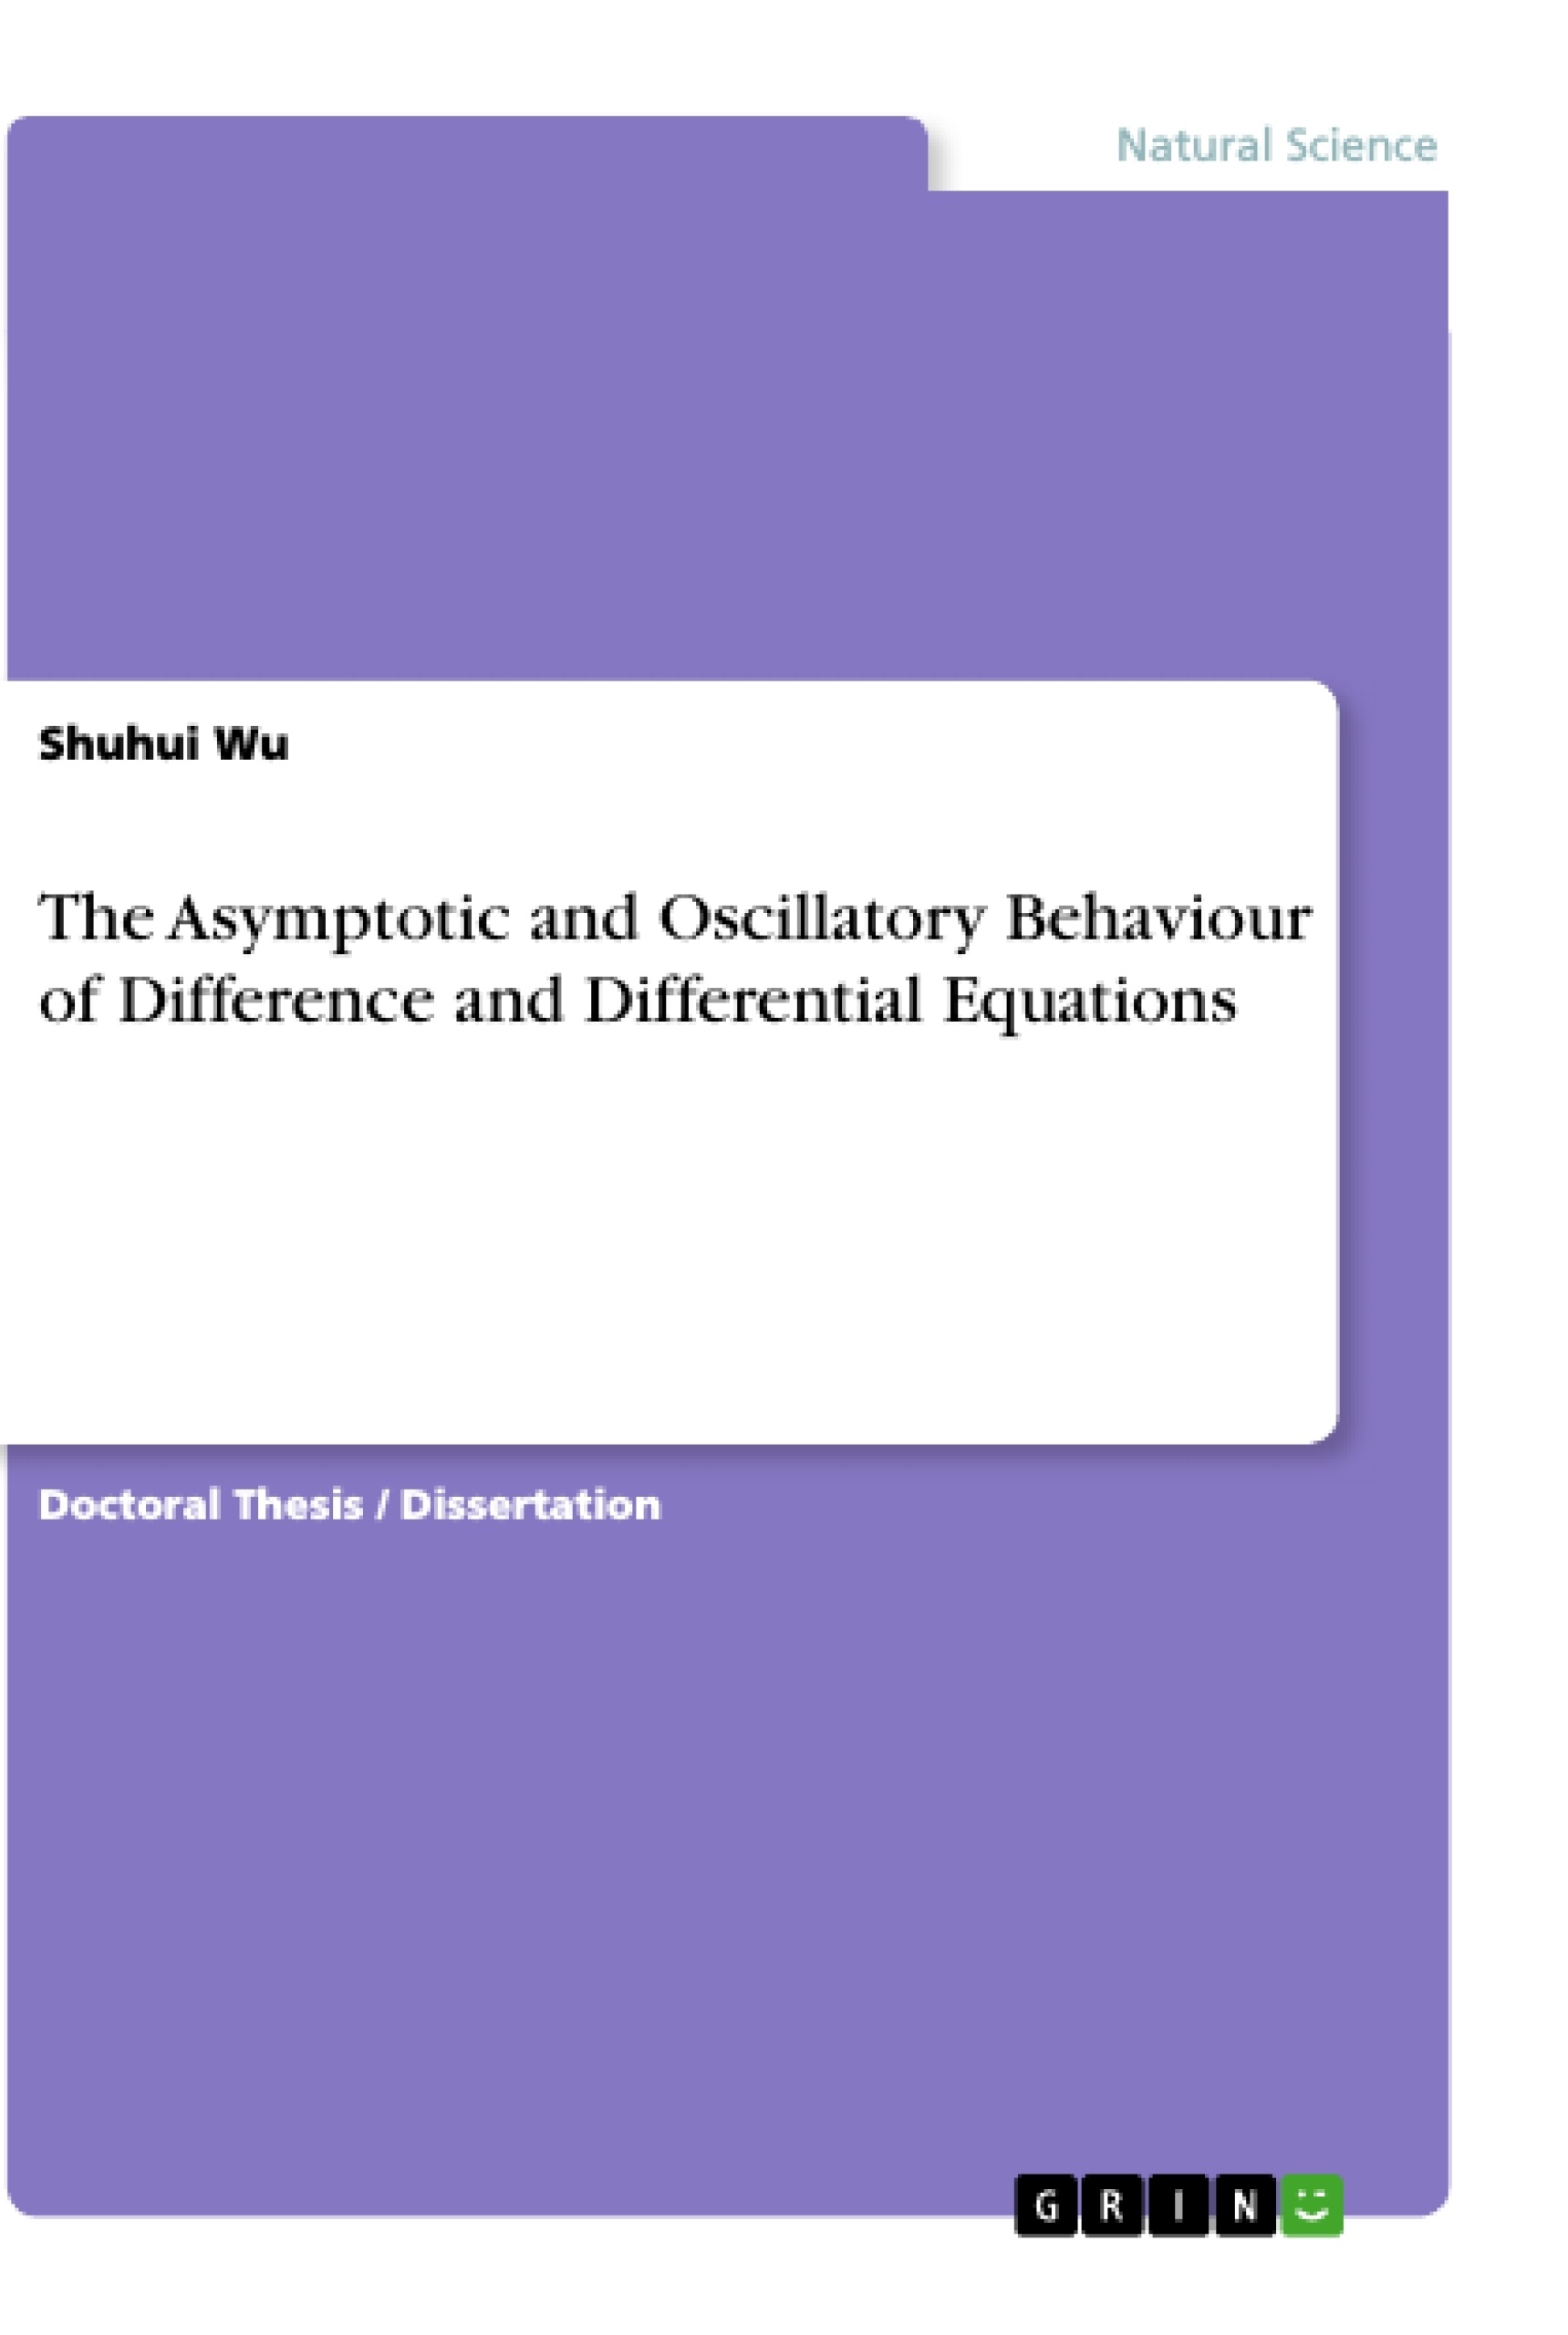 Title: The Asymptotic and Oscillatory Behaviour of Difference and Differential Equations